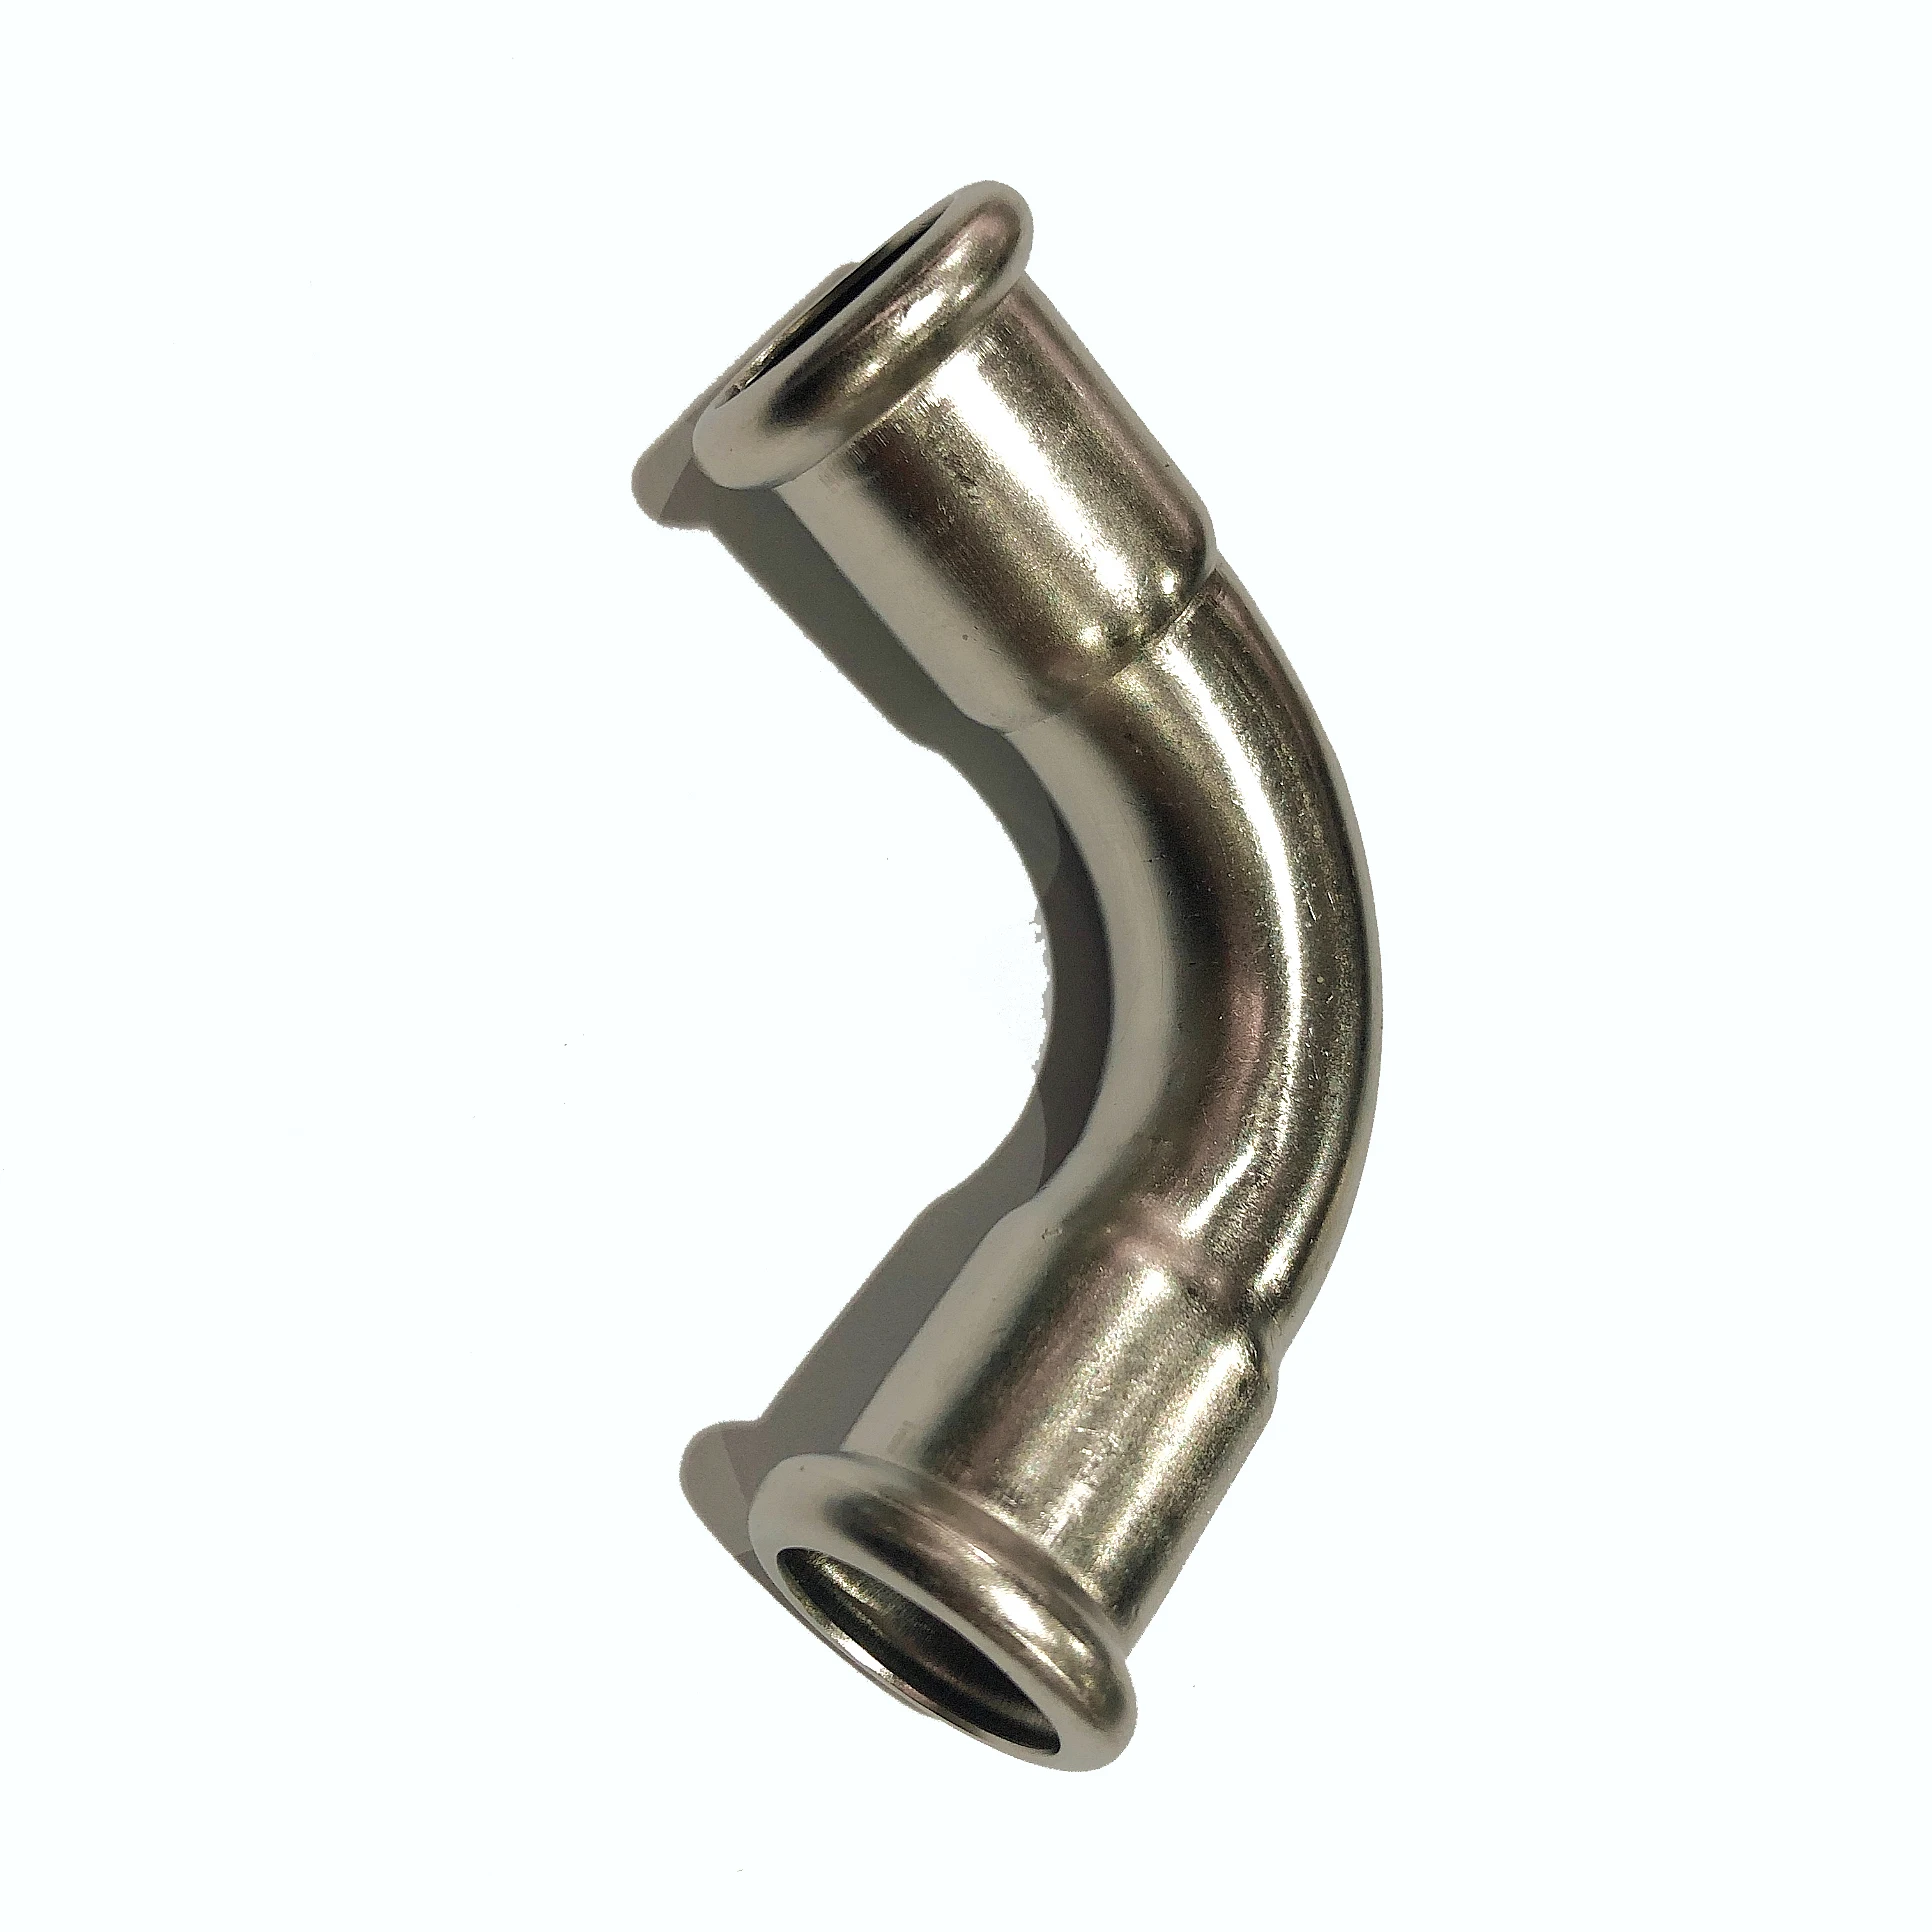 M-PRESS 22MM 90º EQUAL ELBOW WATER PRESS FITTING PACK OF 10 M-Profile